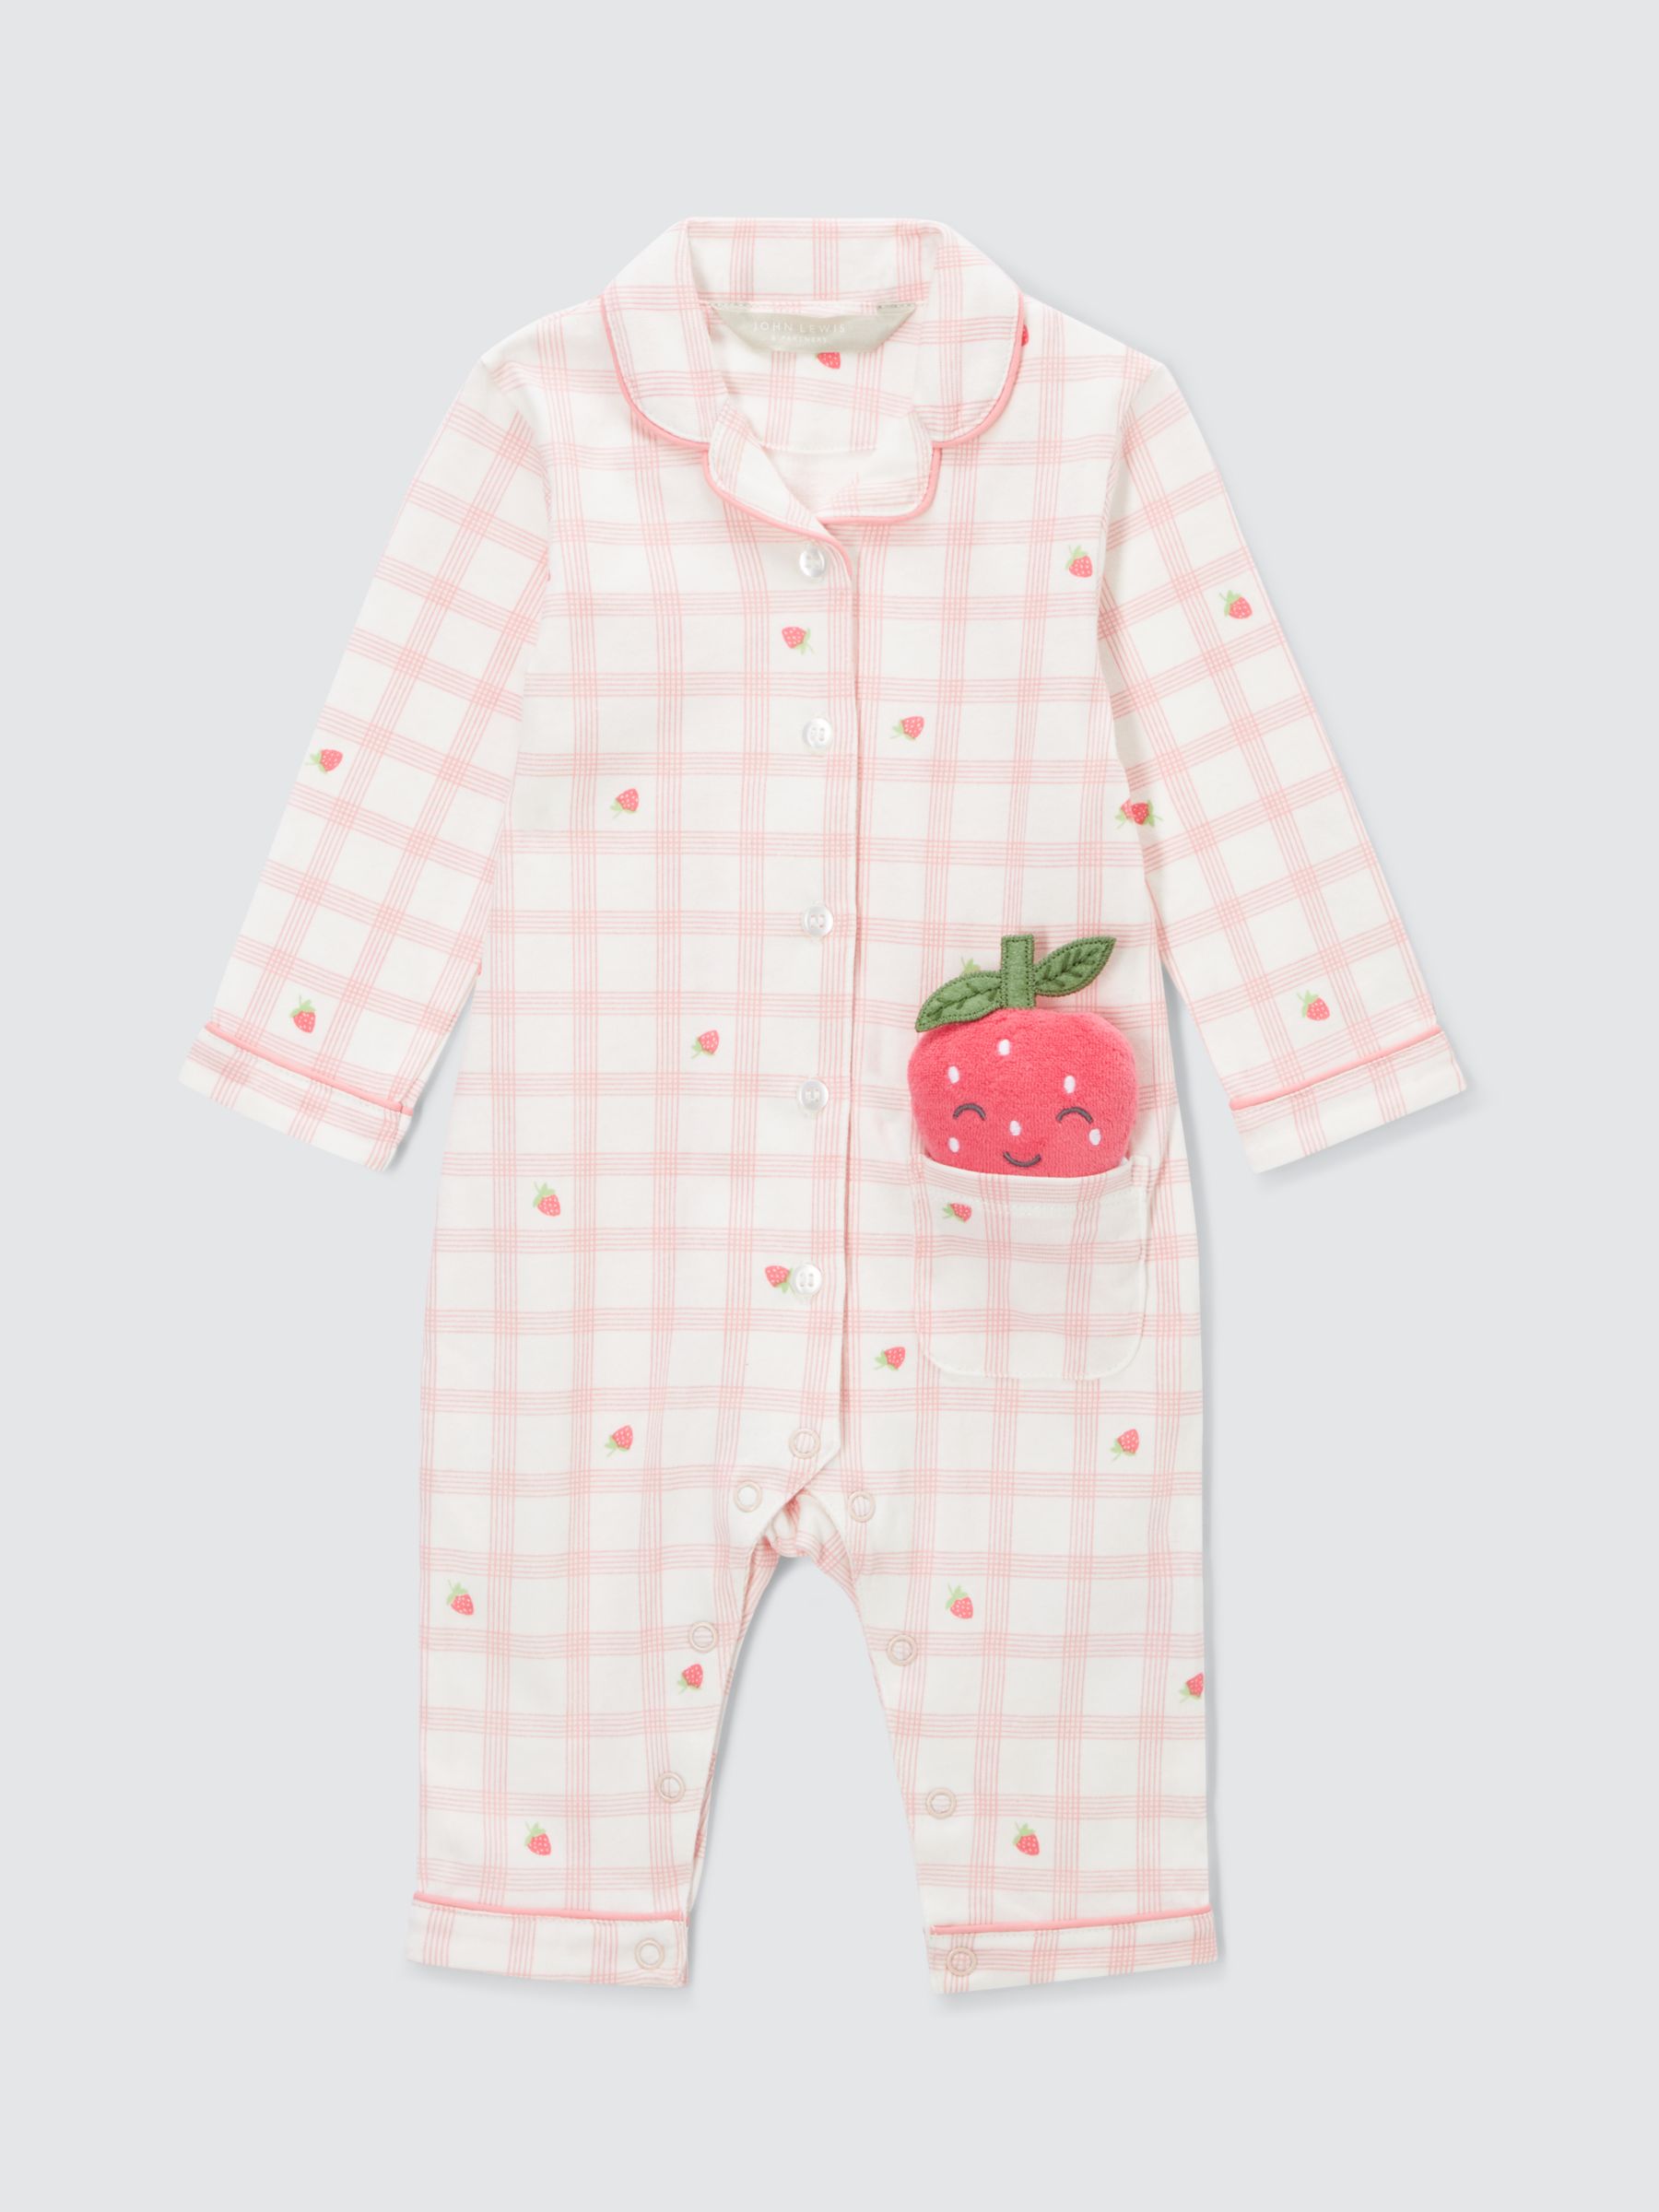 John Lewis Baby Strawberry Gingham Pyjamas with Strawberry Toy, Pink, 2-3 years